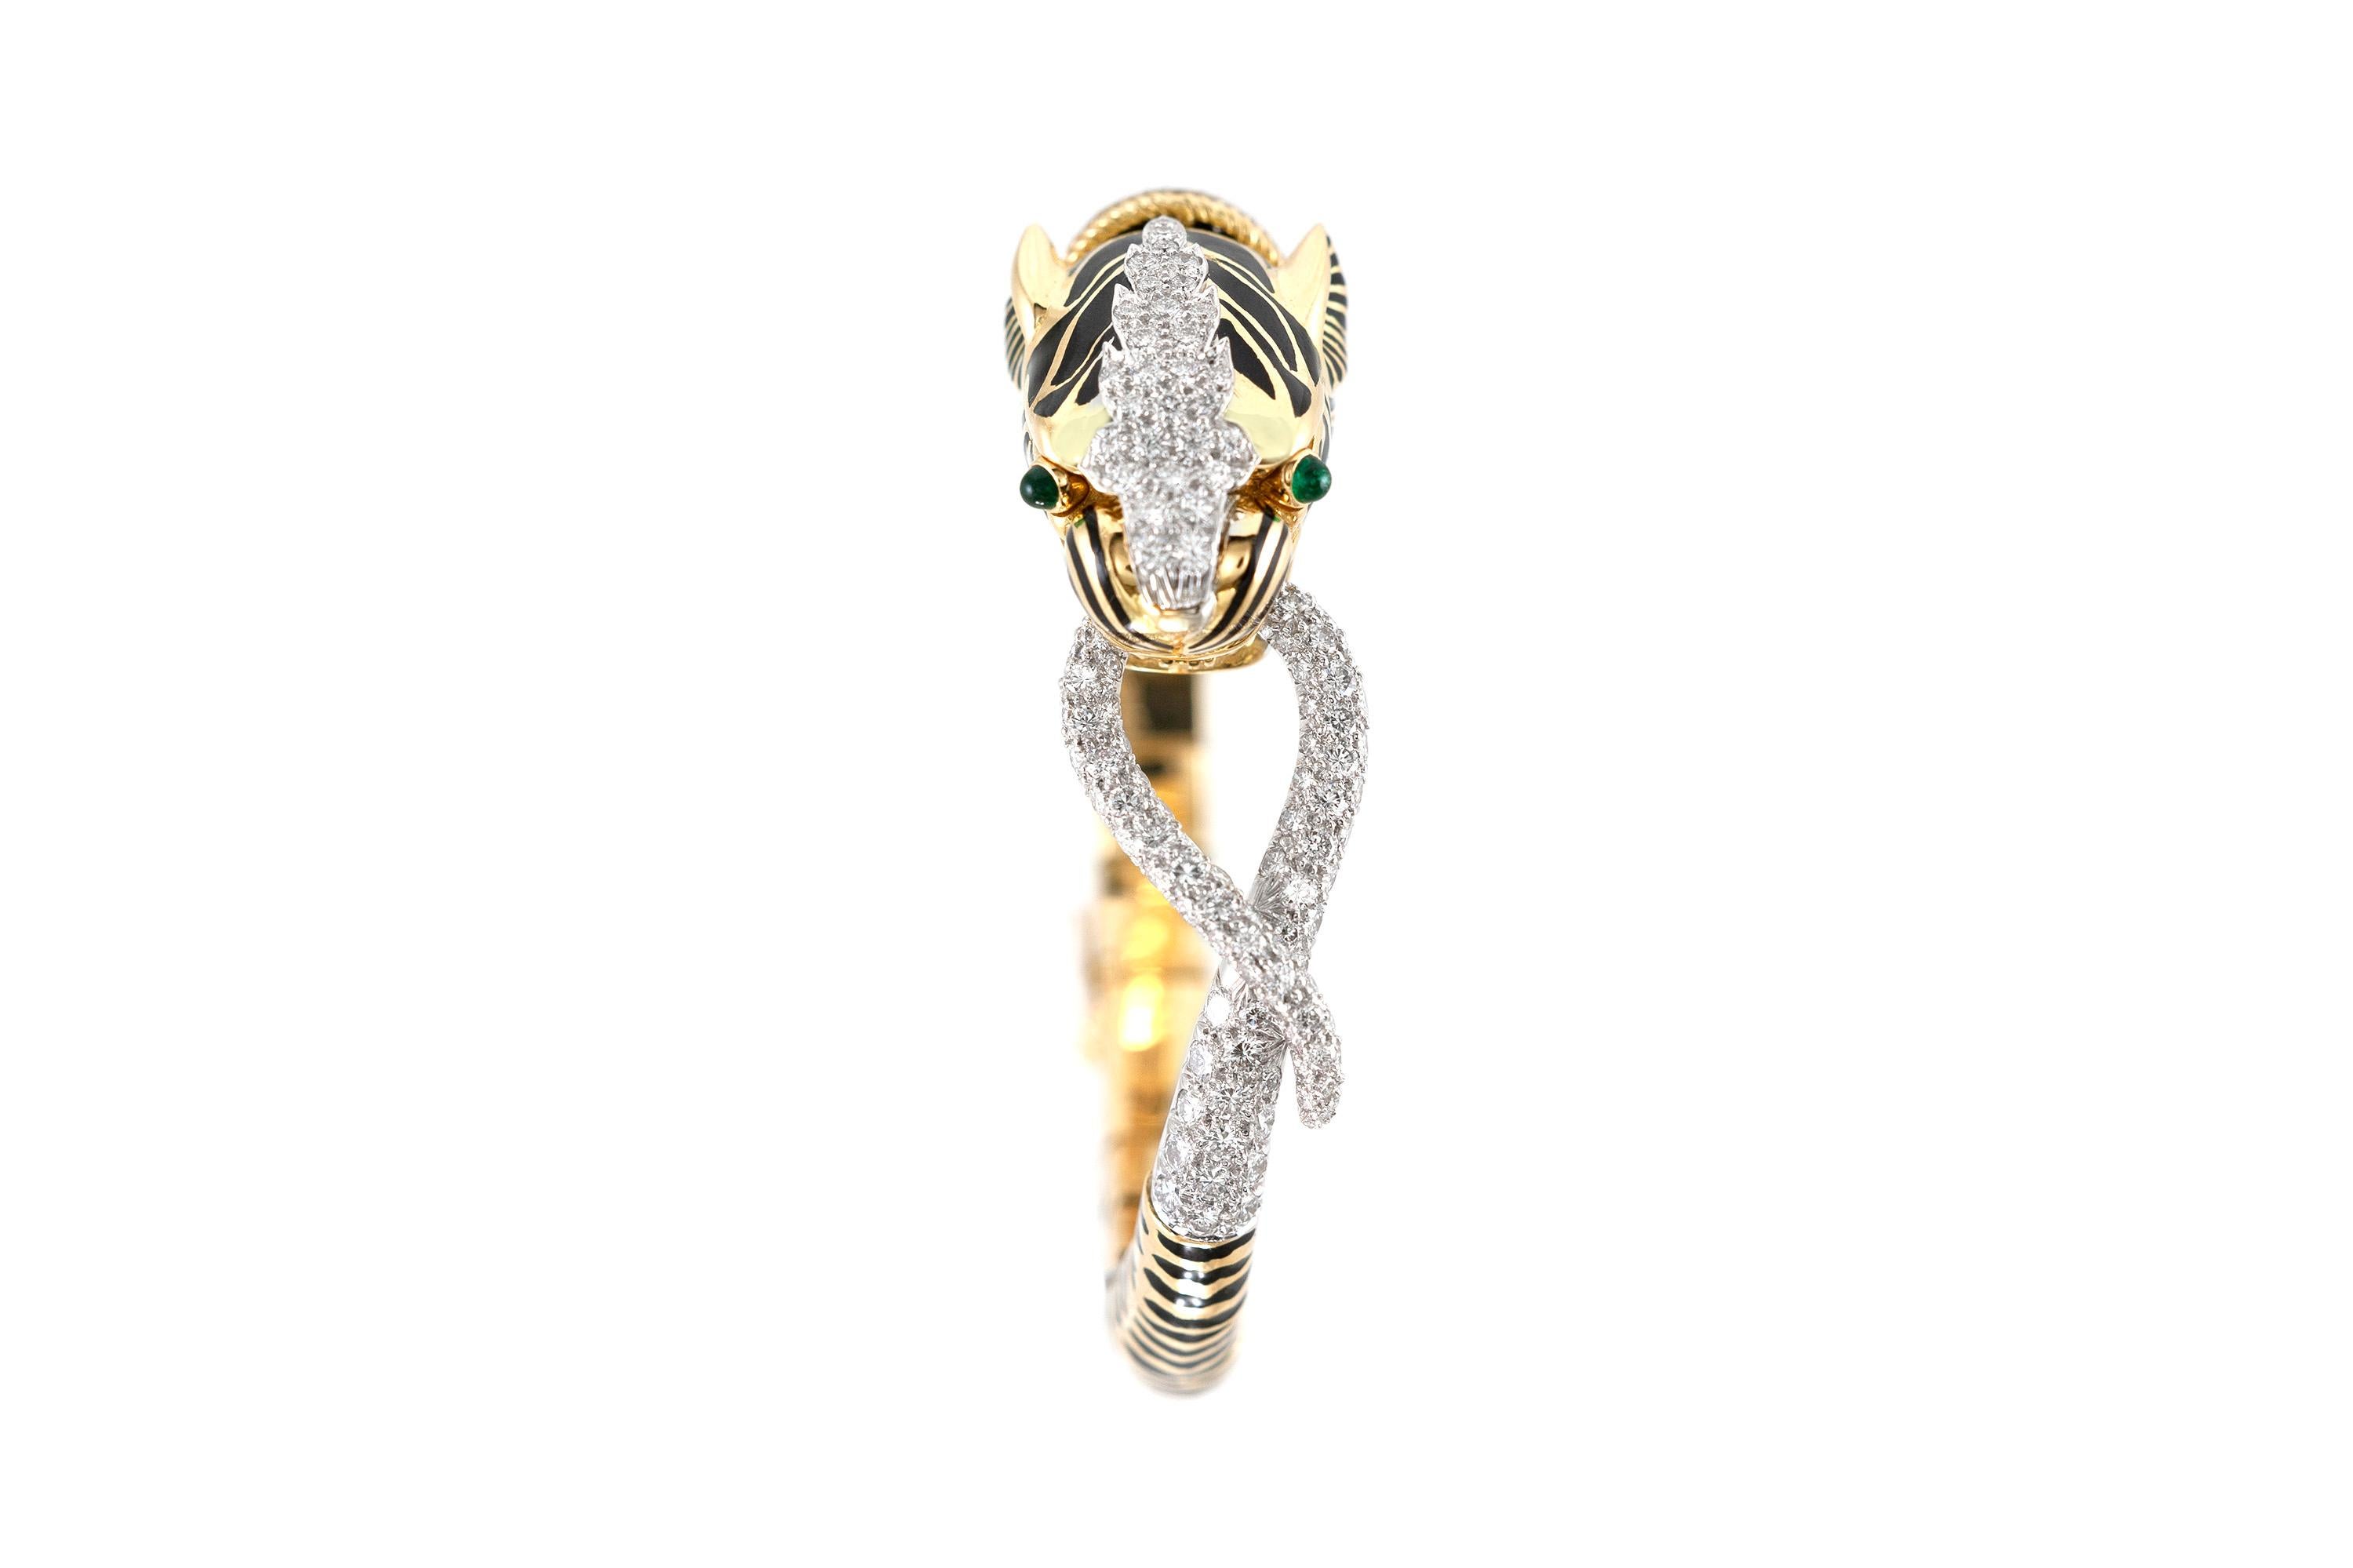 Finely crafted in 18k yellow gold and black enamel with round brilliant cut Diamonds weighing approximately a total of 5.45 carats.
F-G color, VVS-VS clarity
The bracelet features two Cabochon Emeralds, as the eyes of the tiger, weighing